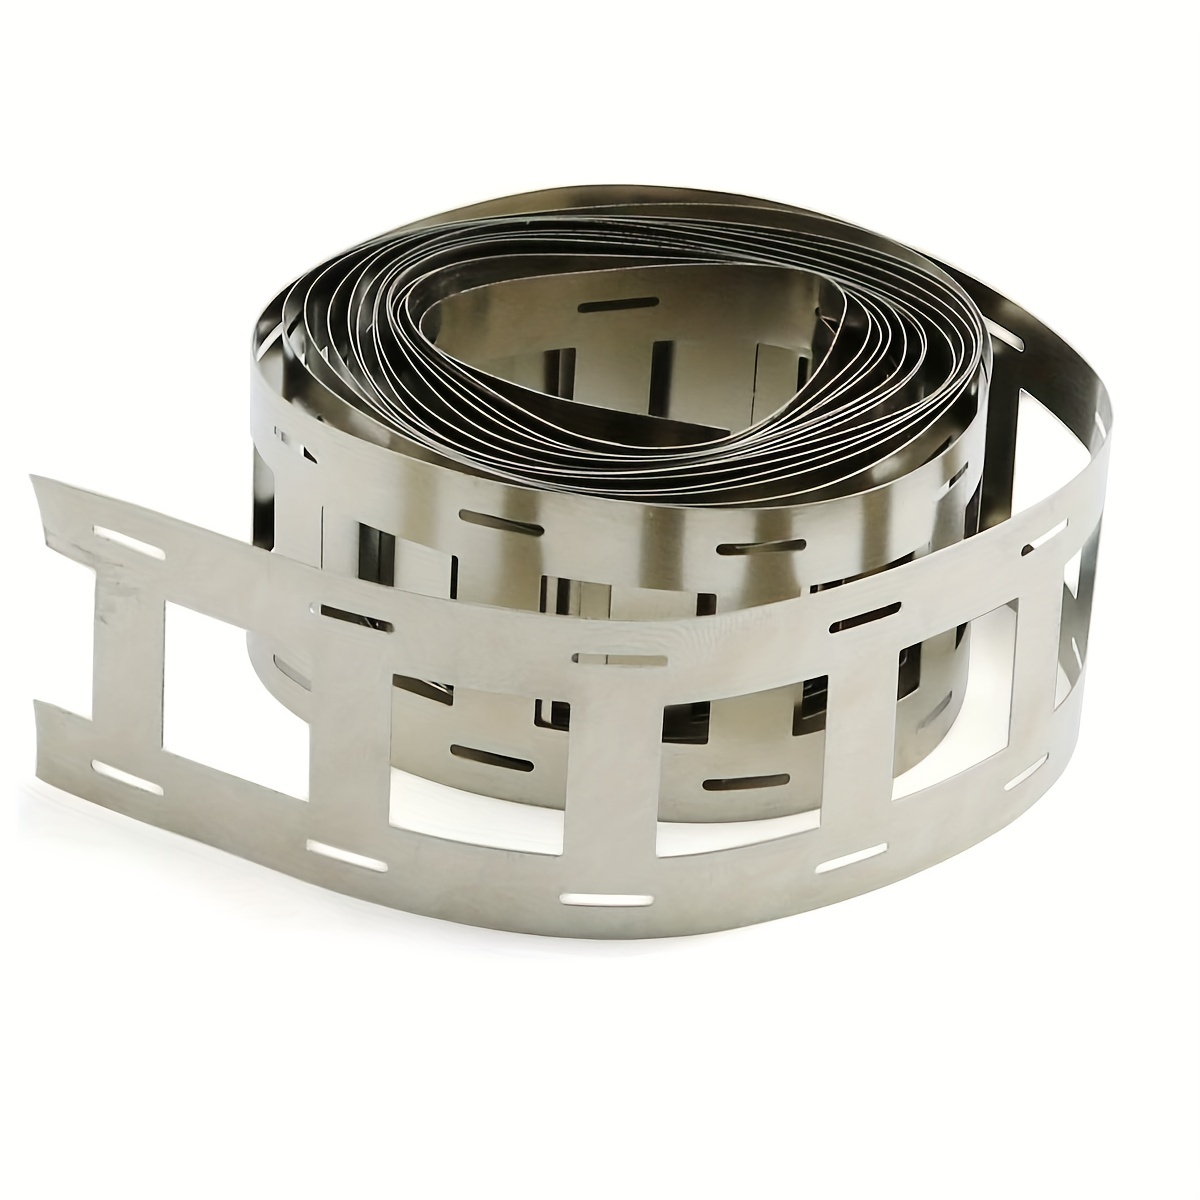 

1 Roll Nickel Plated Strip (16.4ft/roll) 0.15x27mm, Used For Spot Welding Of Nickel Plated Strips For 2 Parallel 18650 Batteries